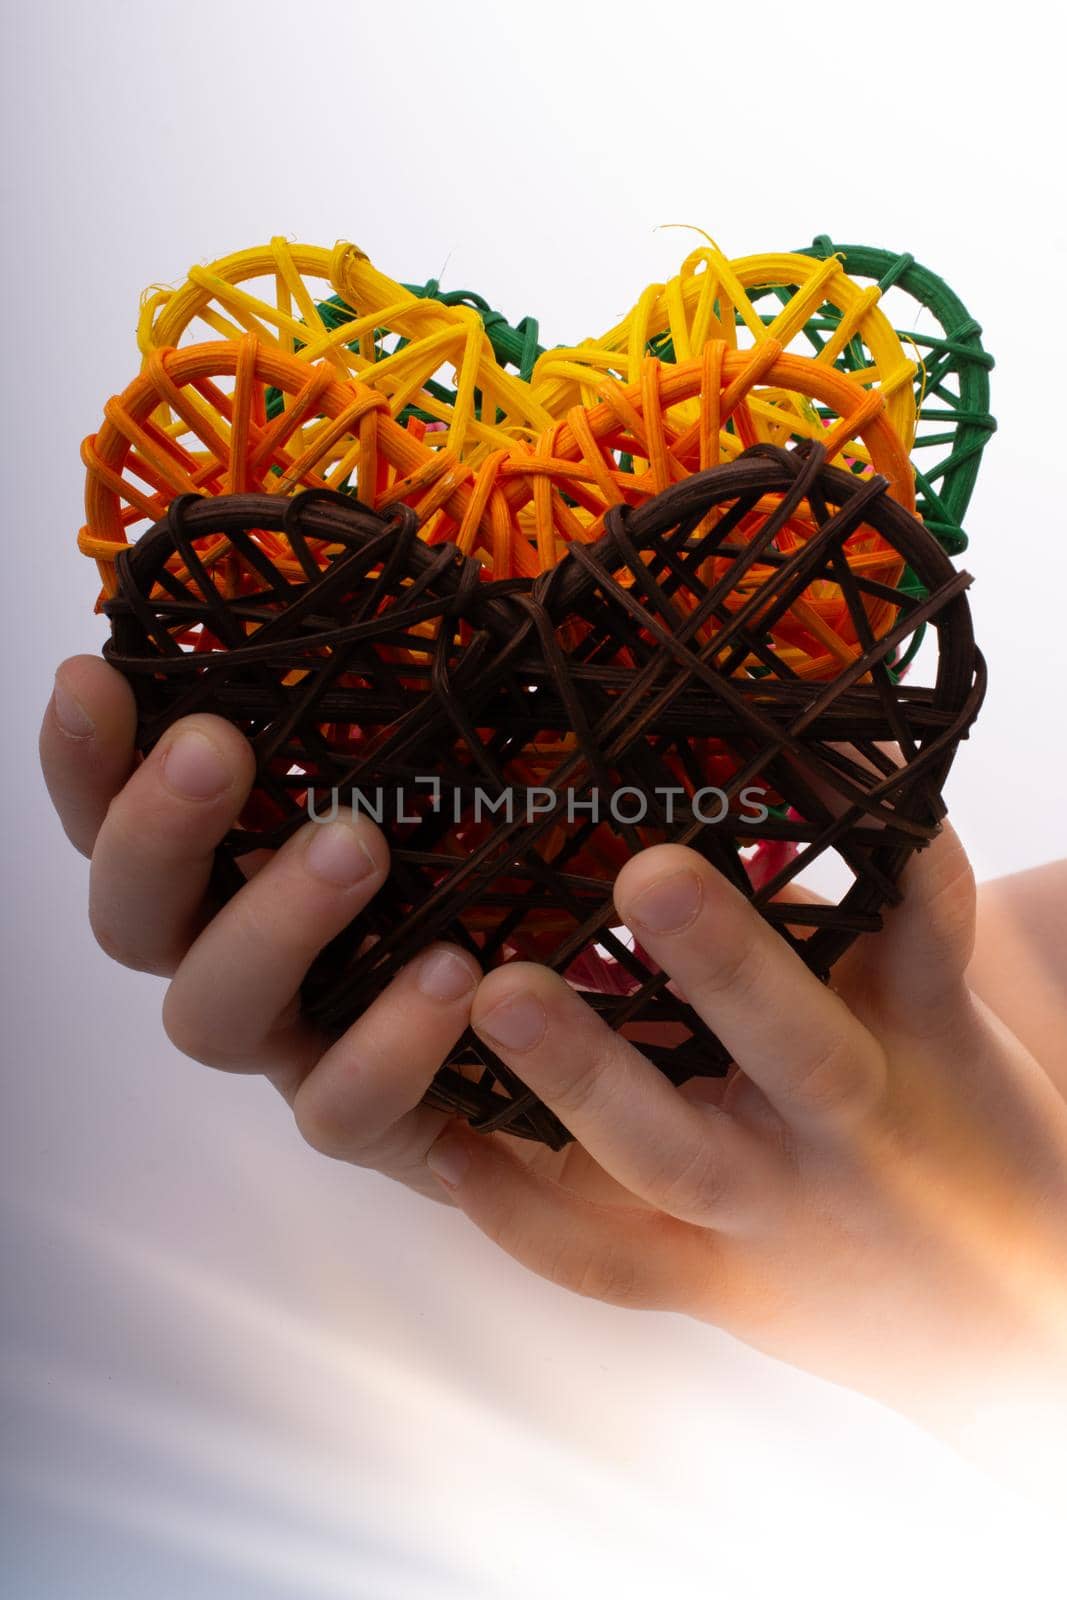 Handmade straw heart or valentines day object in hand